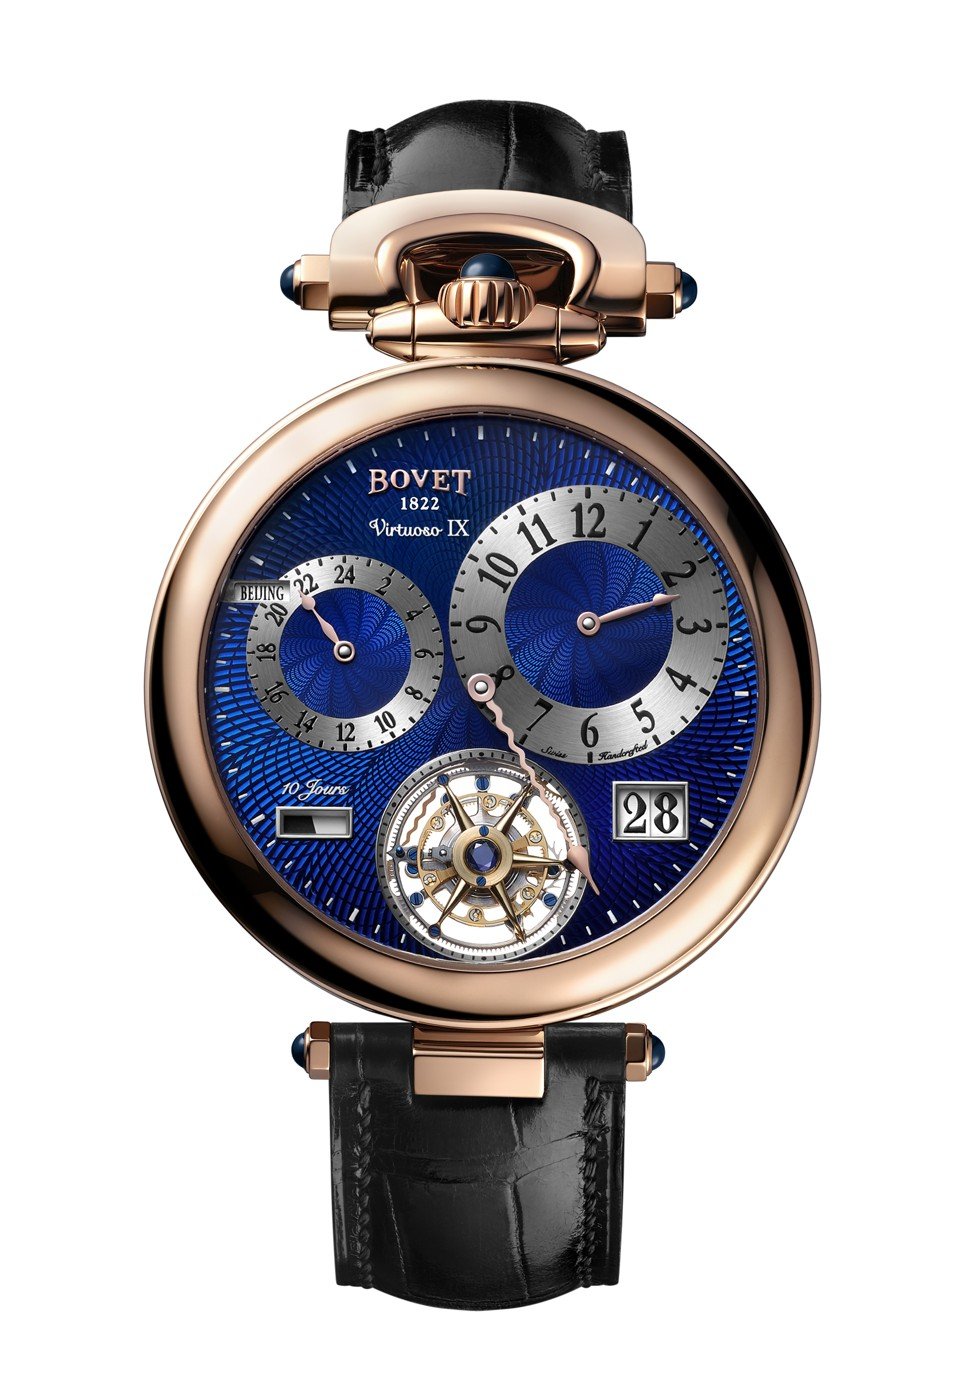 Bovet’s Tourbillon Amadeo Fleurier Virtuoso IX – a reversible wristwatch, which can be turned also be turned into a pocket watch or even a table clock. Photo: Bovet